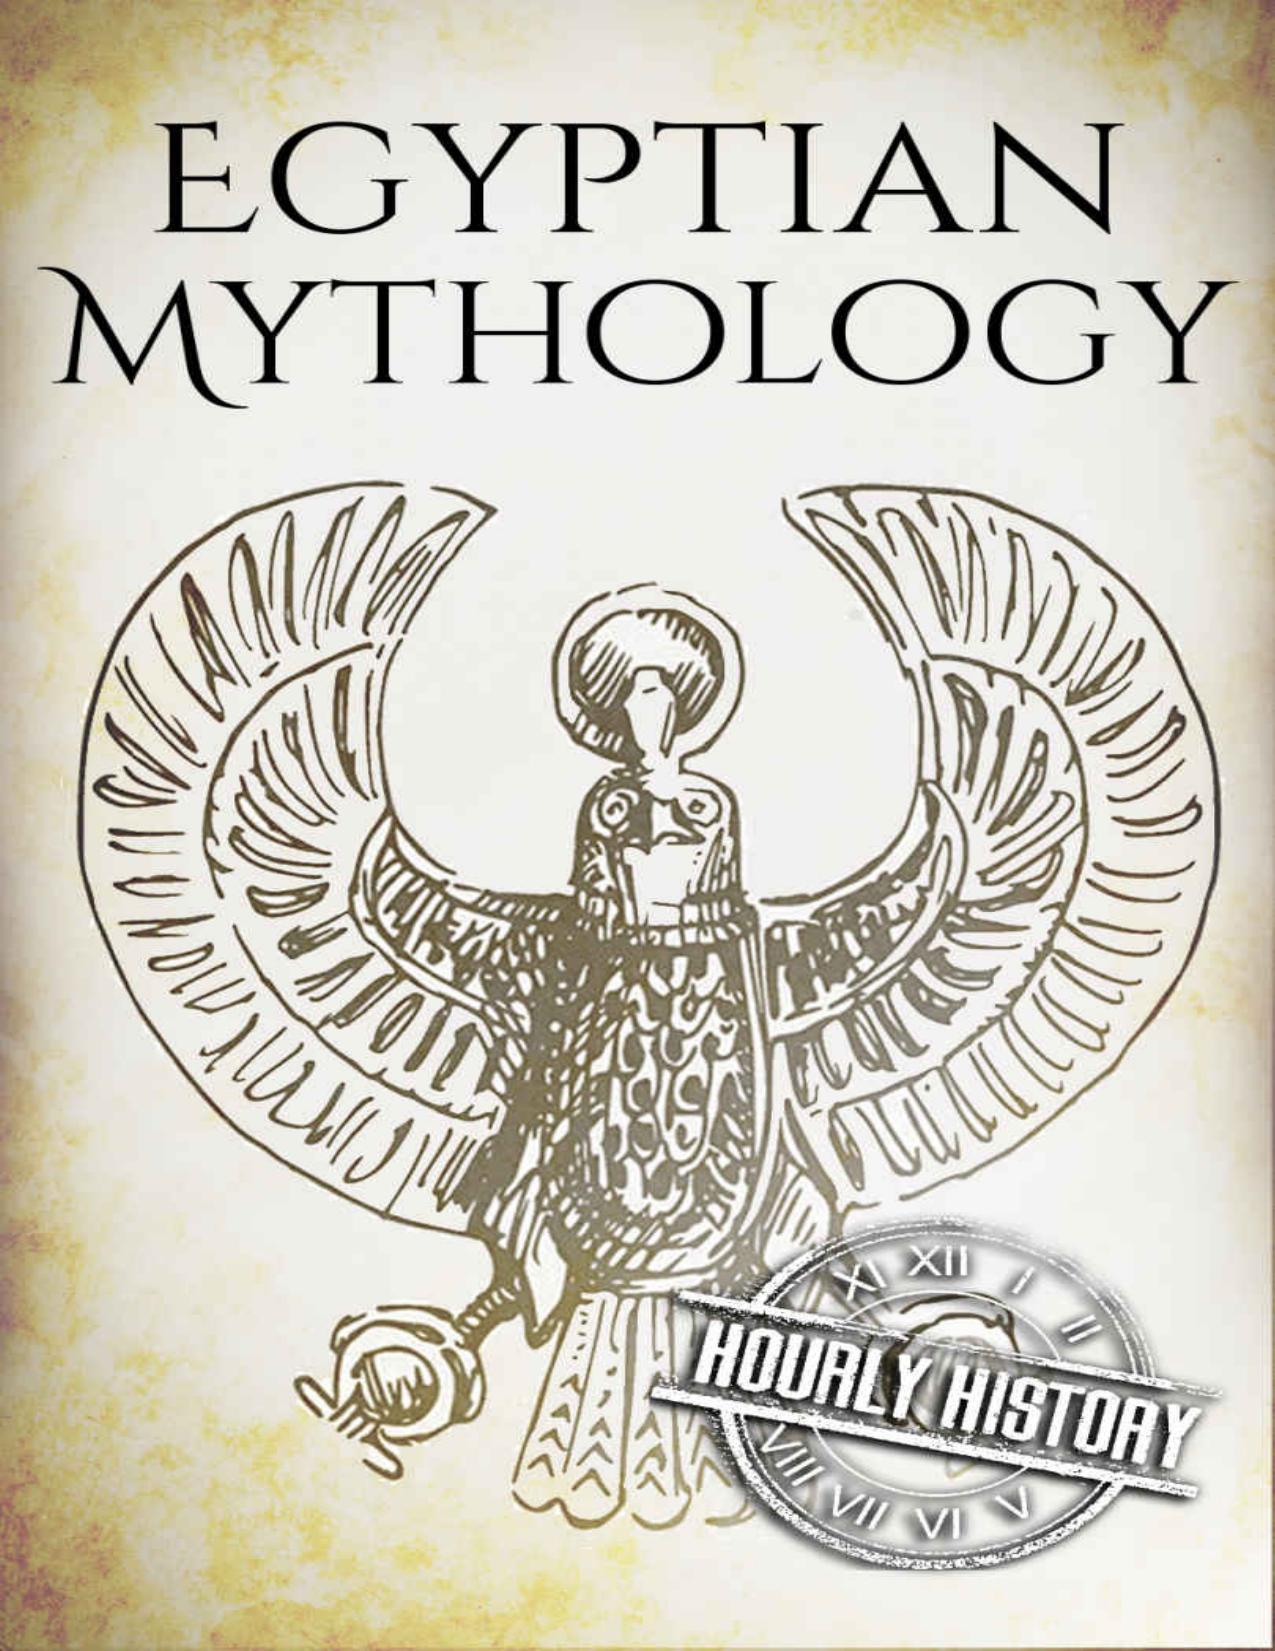 Egyptian Mythology: A Concise Guide to the Ancient Gods and Beliefs of Egyptian Mythology (Greek Mythology - Norse Mythology - Egyptian Mythology - Celtic Mythology Book 3) by Hourly History